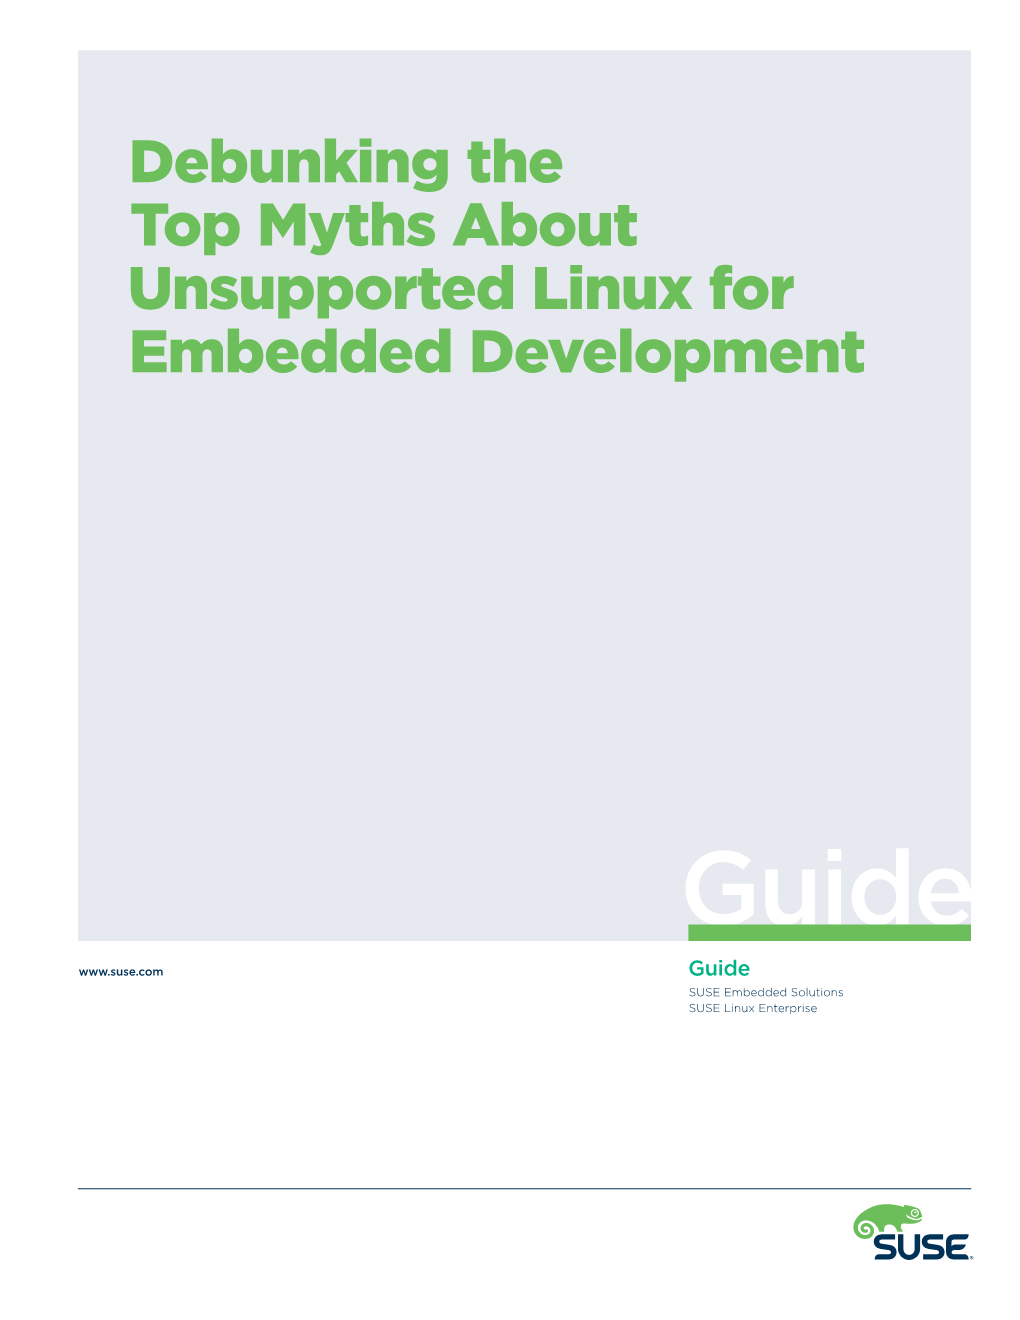 Debunking the Top Myths About Unsupported Linux for Embedded Development